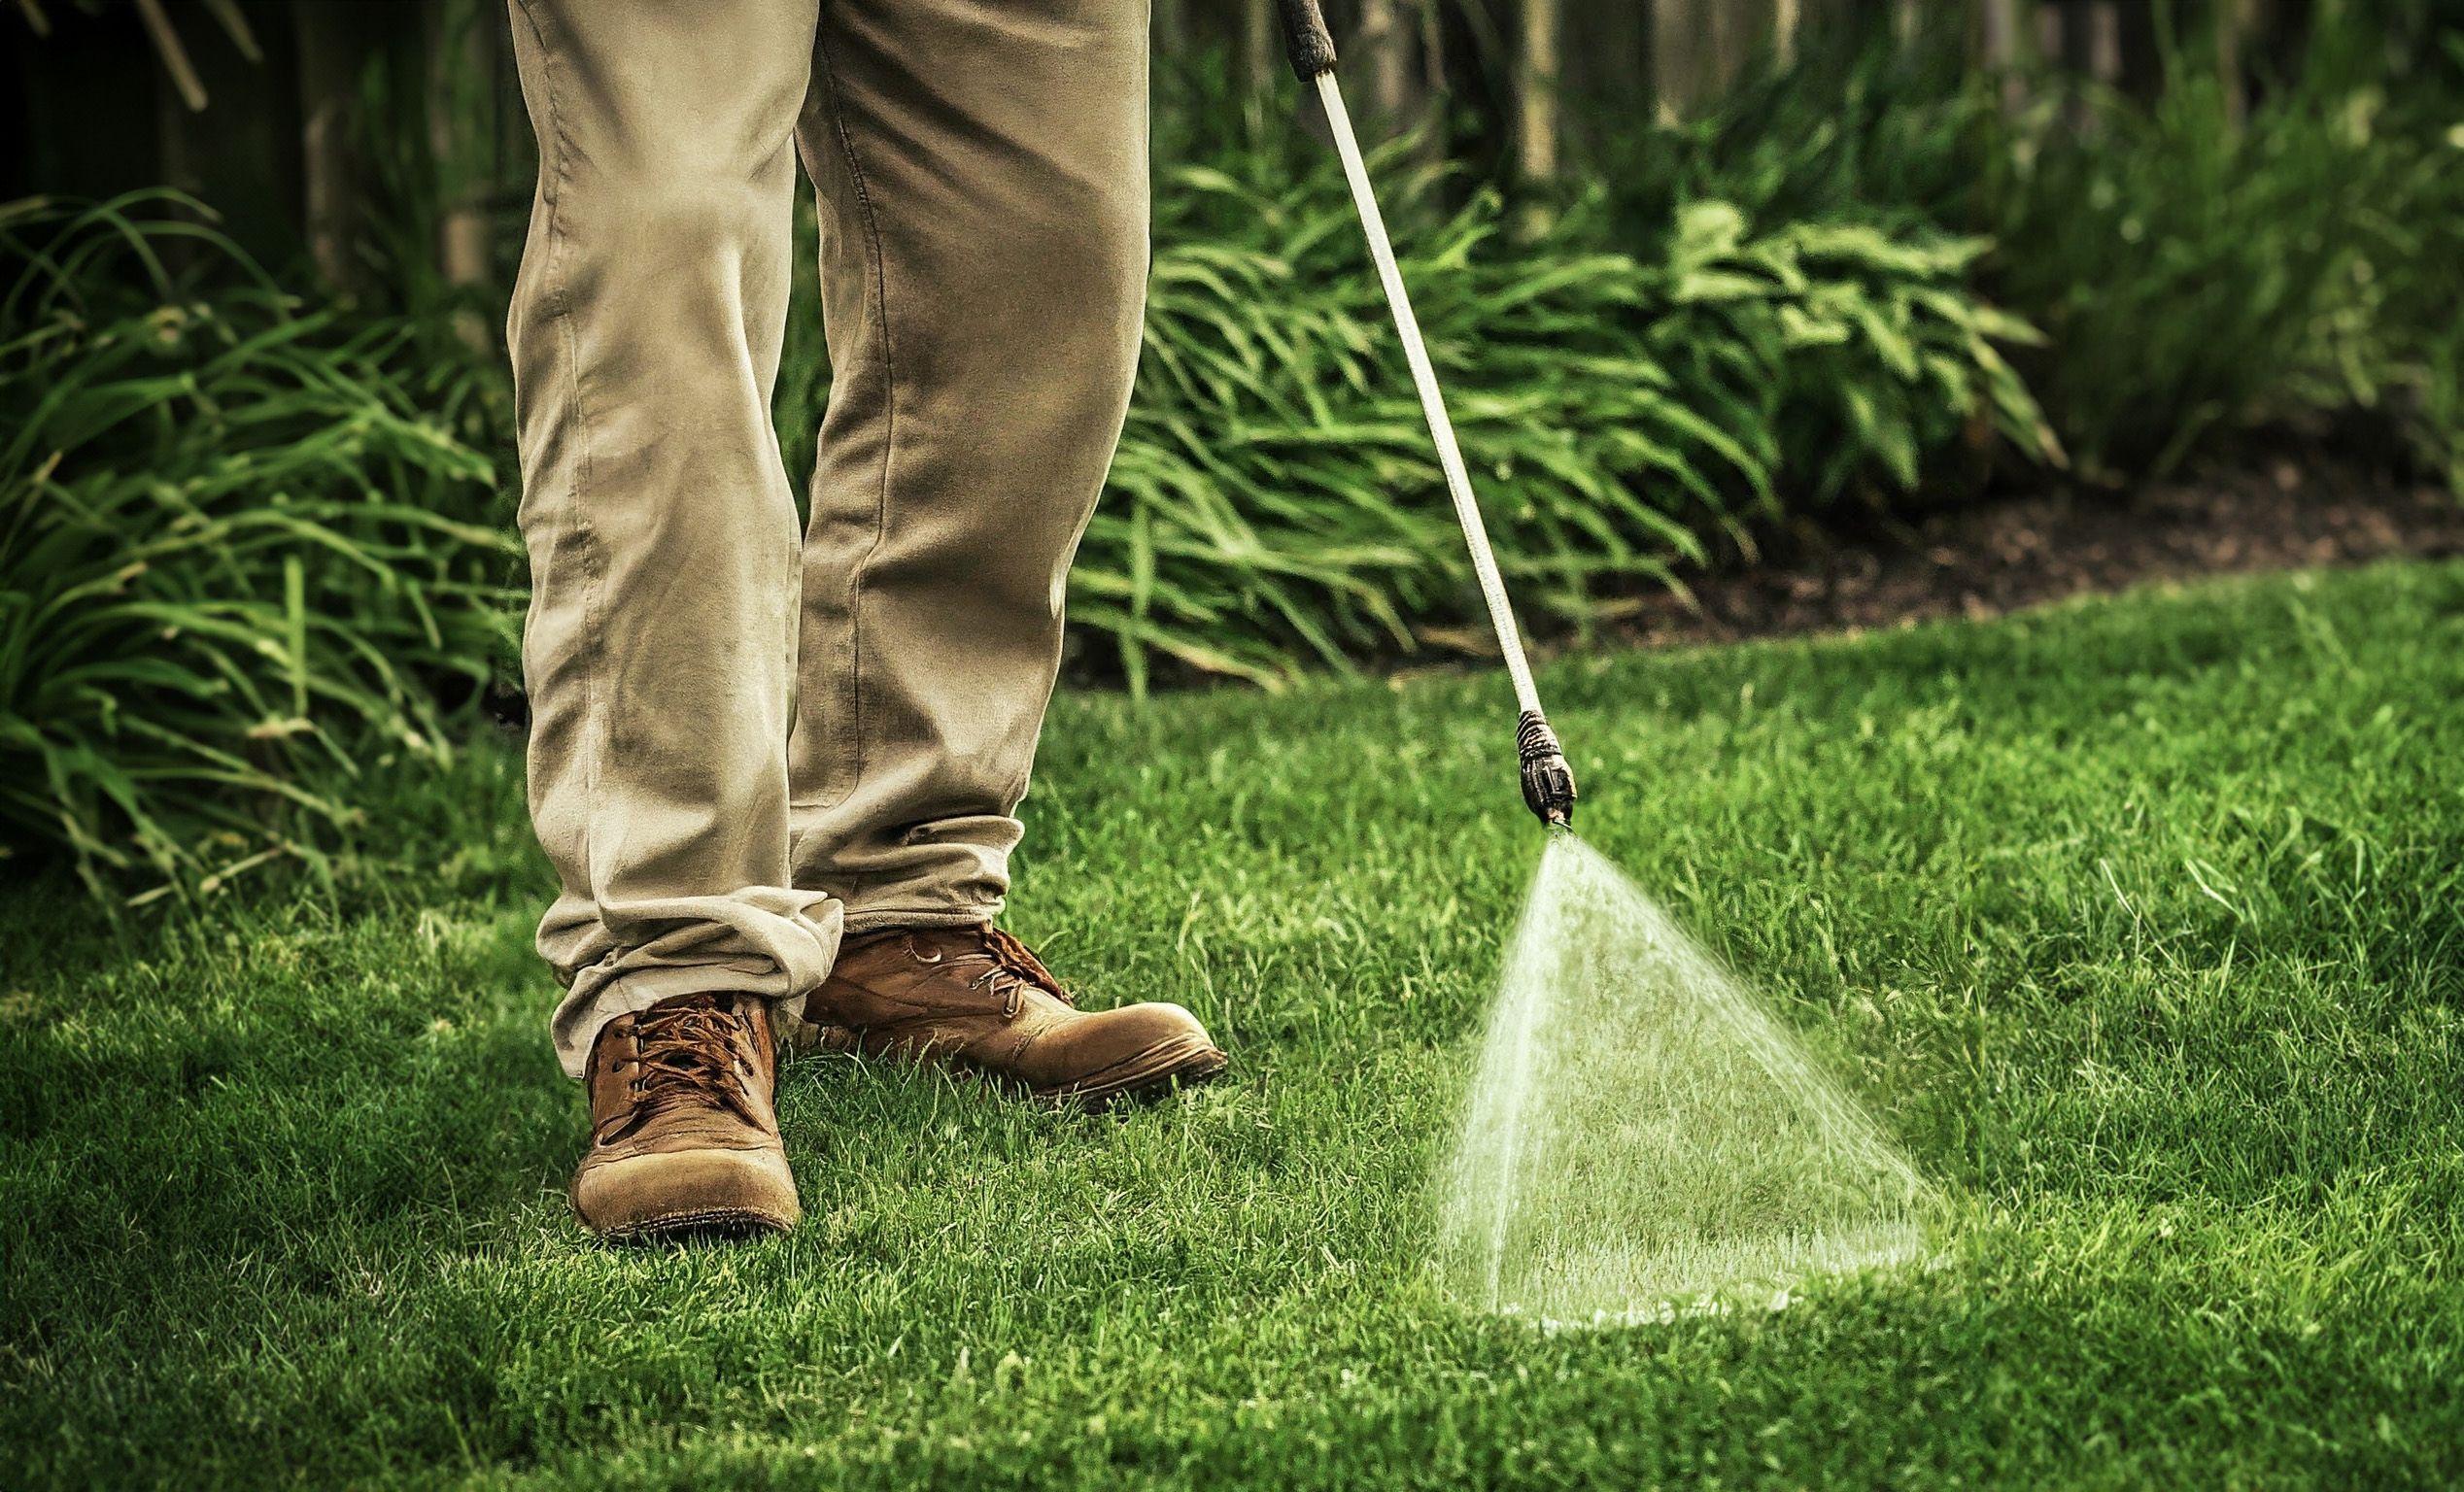 A close-up shot of a technician in heavy pants and work boots, spraying a lawn with a sprayer.